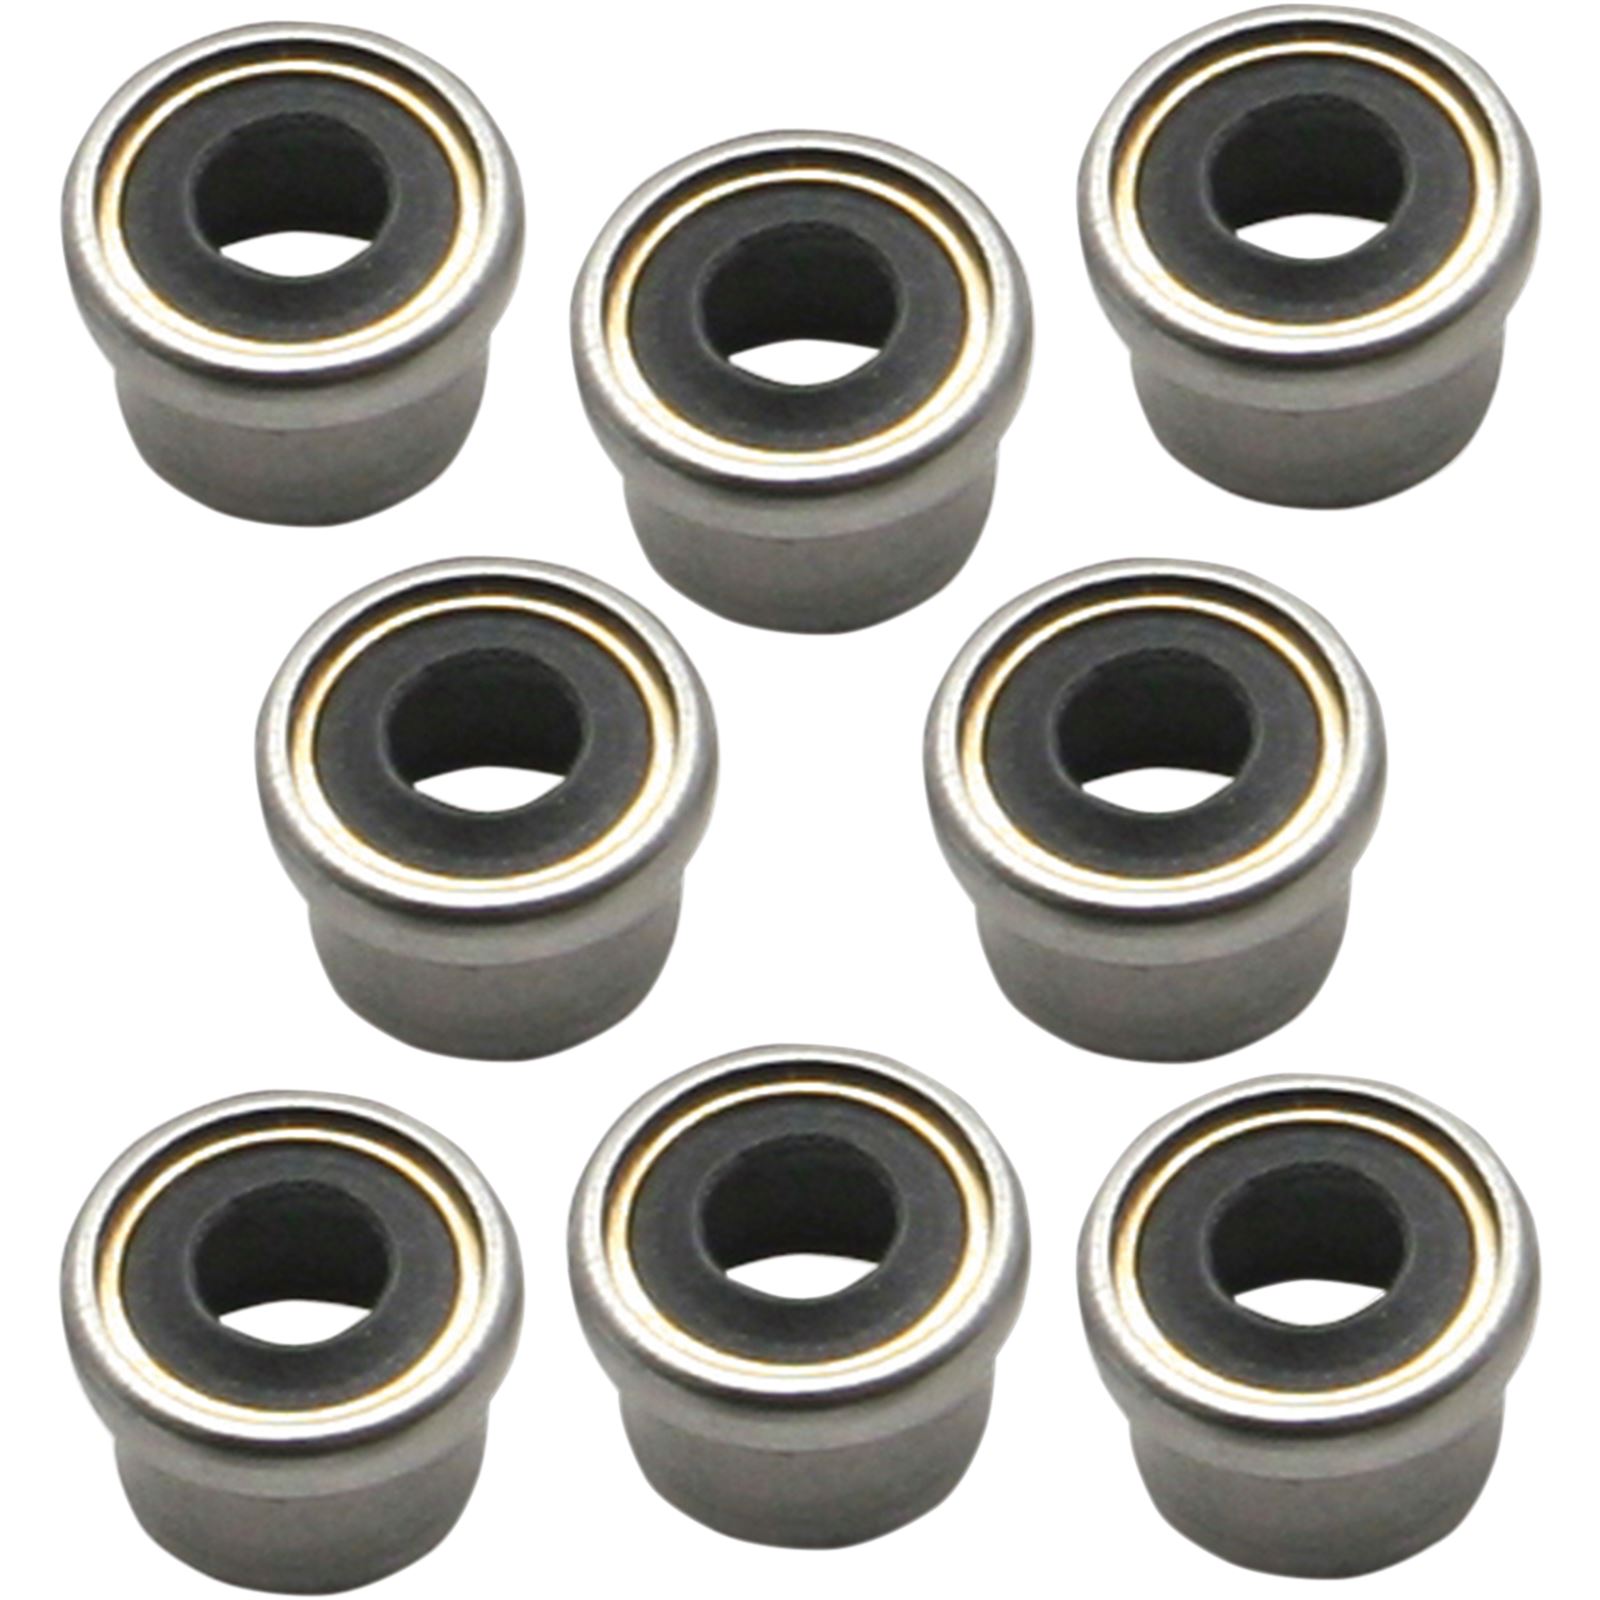 S&S Cycle Valve Guide Seals - 8/Pack